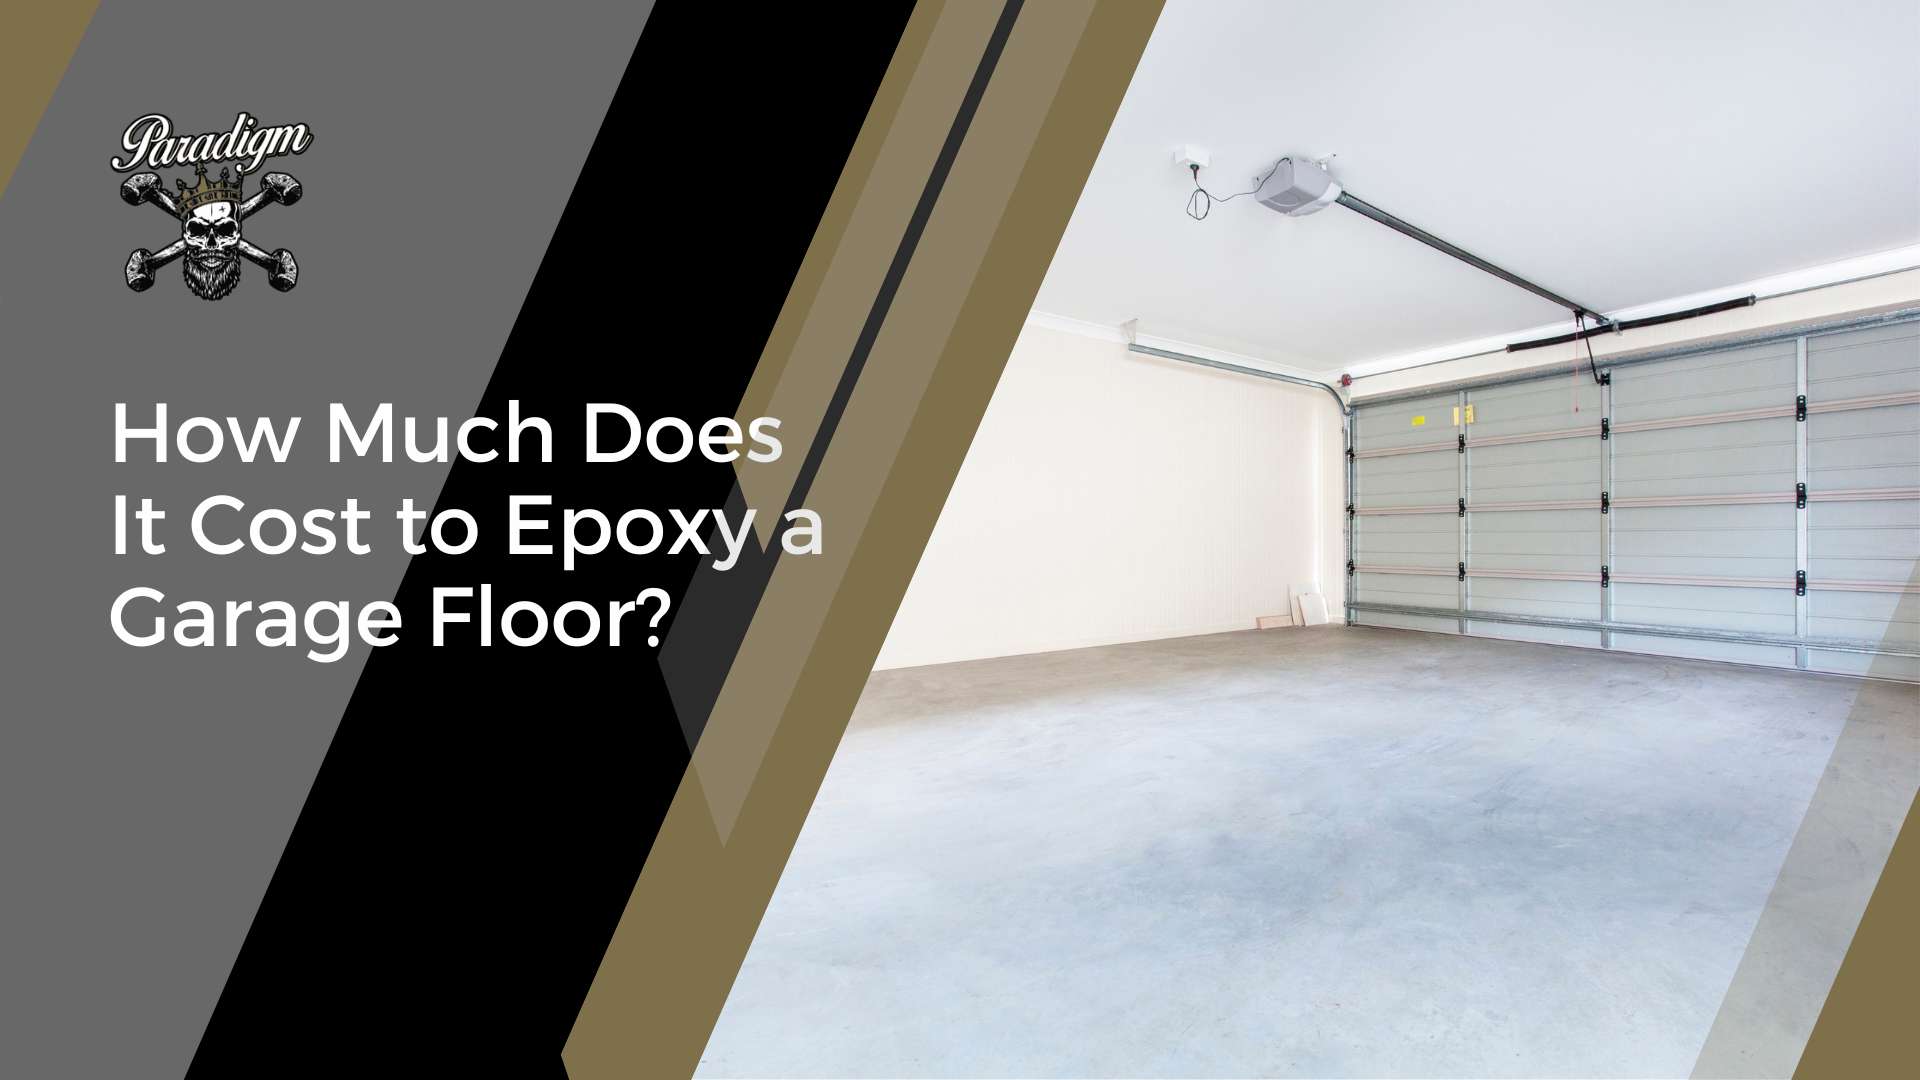 How Much Does It Cost to Epoxy a Garage Floor